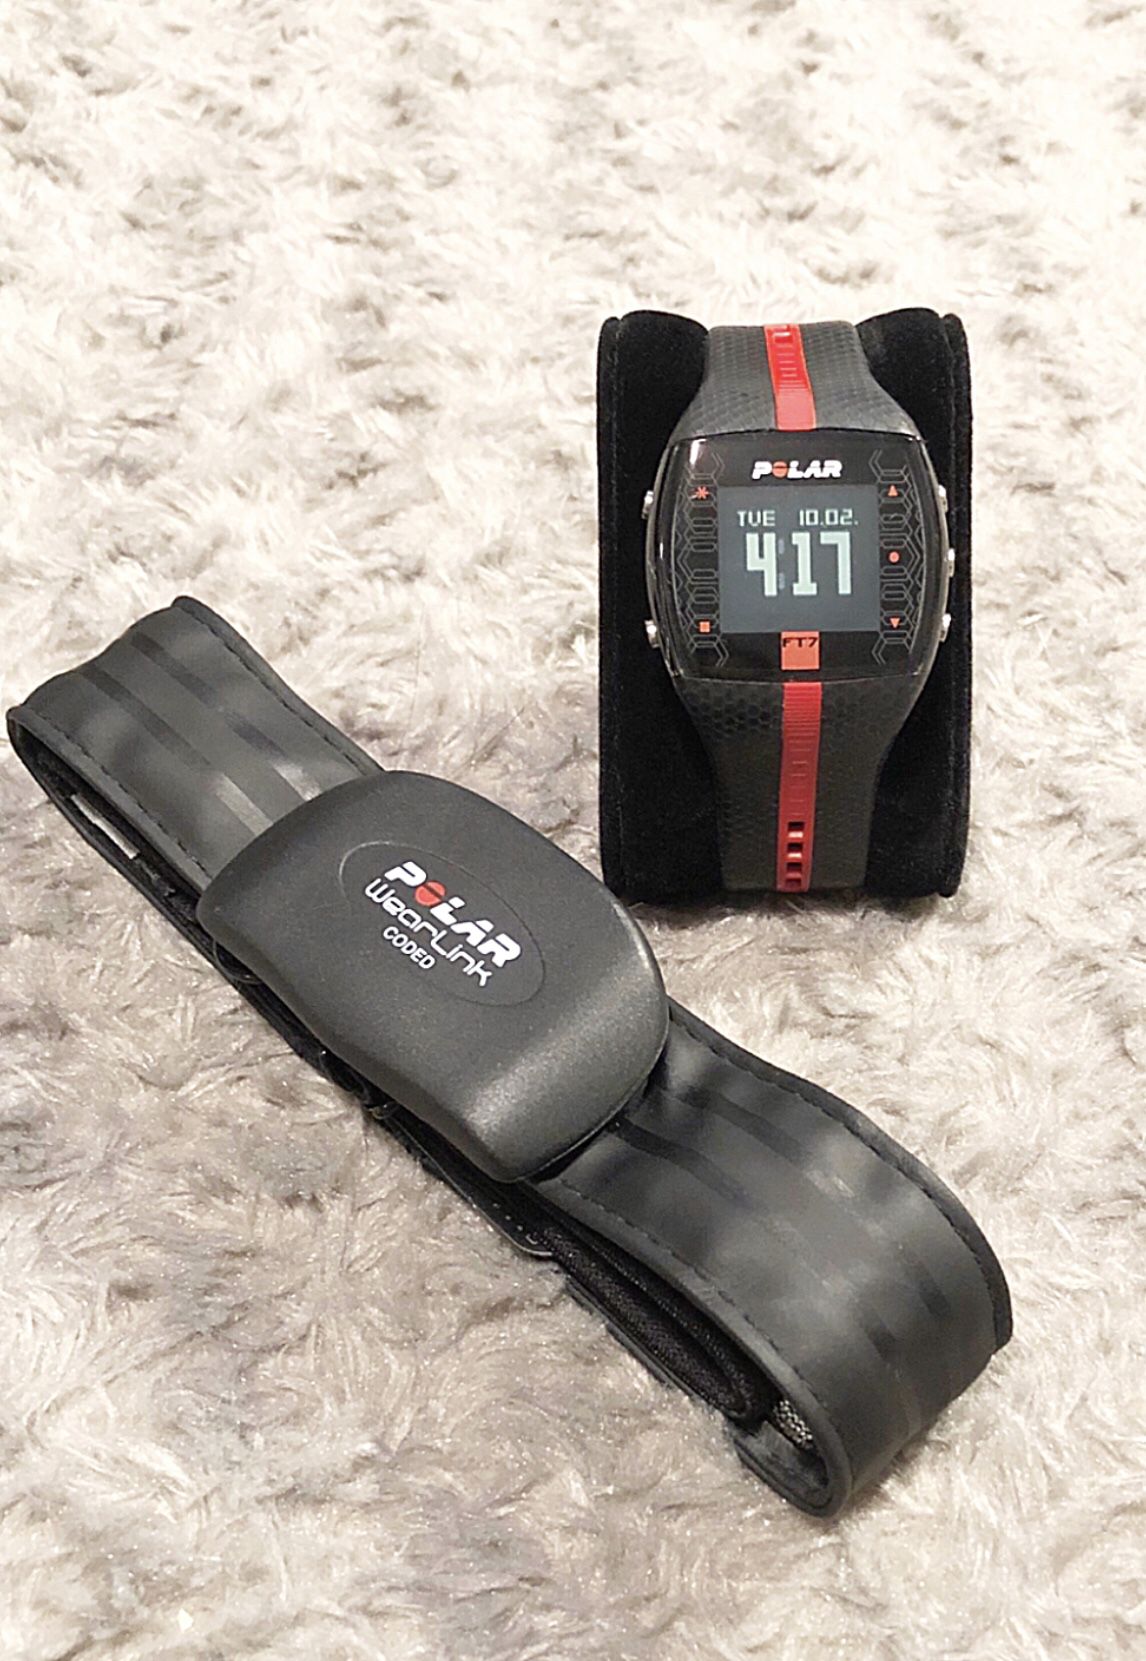 Polar FT7 Watch & Wearlink paid $220 total Like new! Only used a couple times